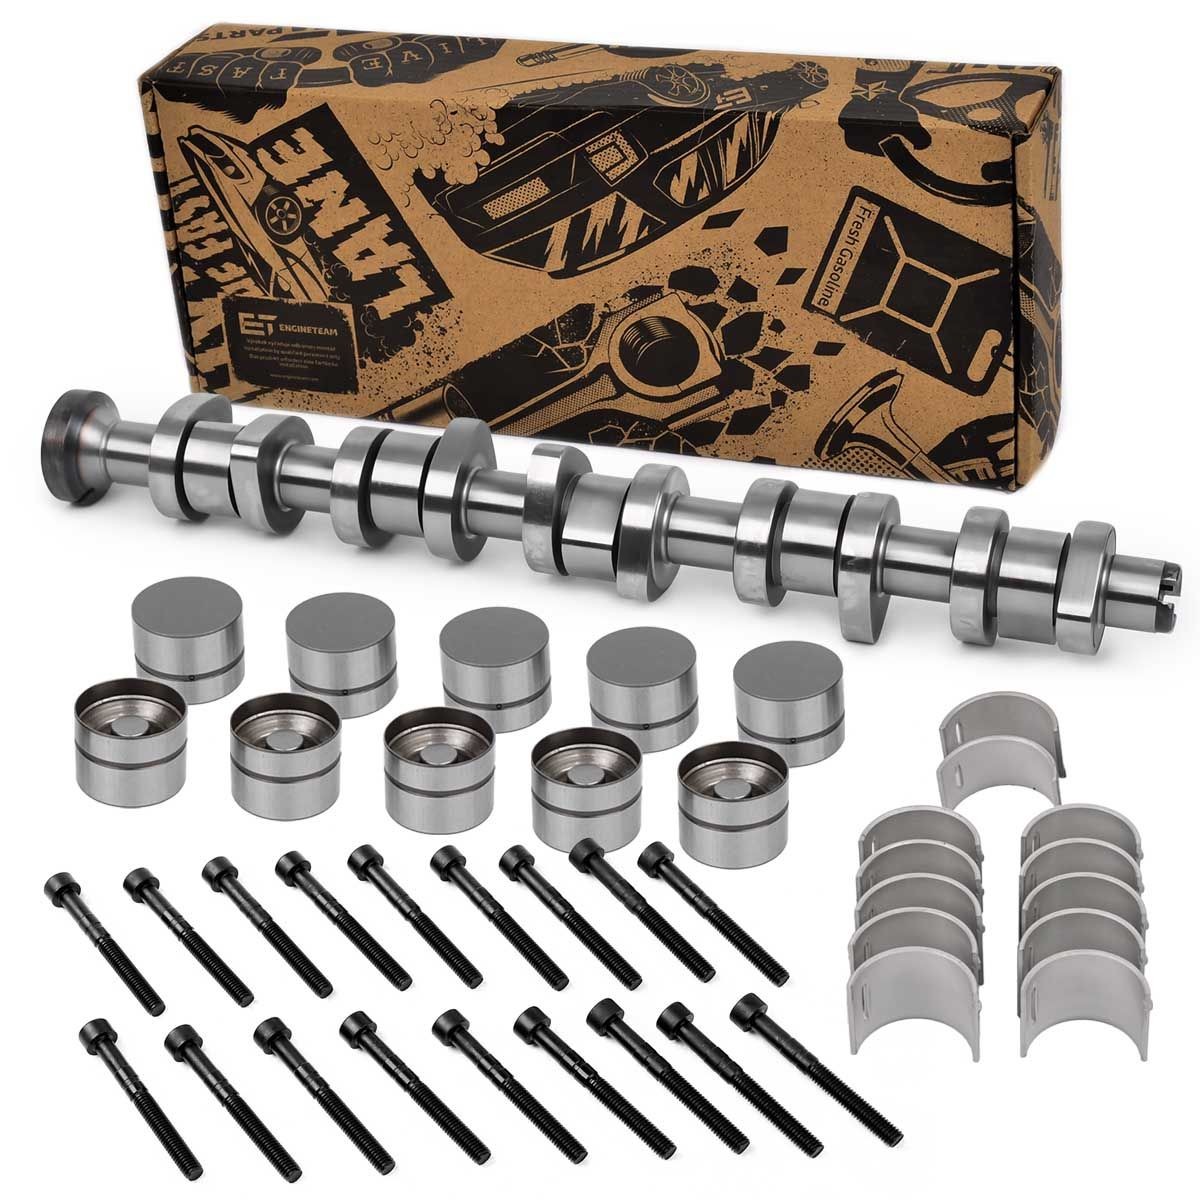 HV0339 ET ENGINETEAM Camshaft Kit ▷ AUTODOC price and review